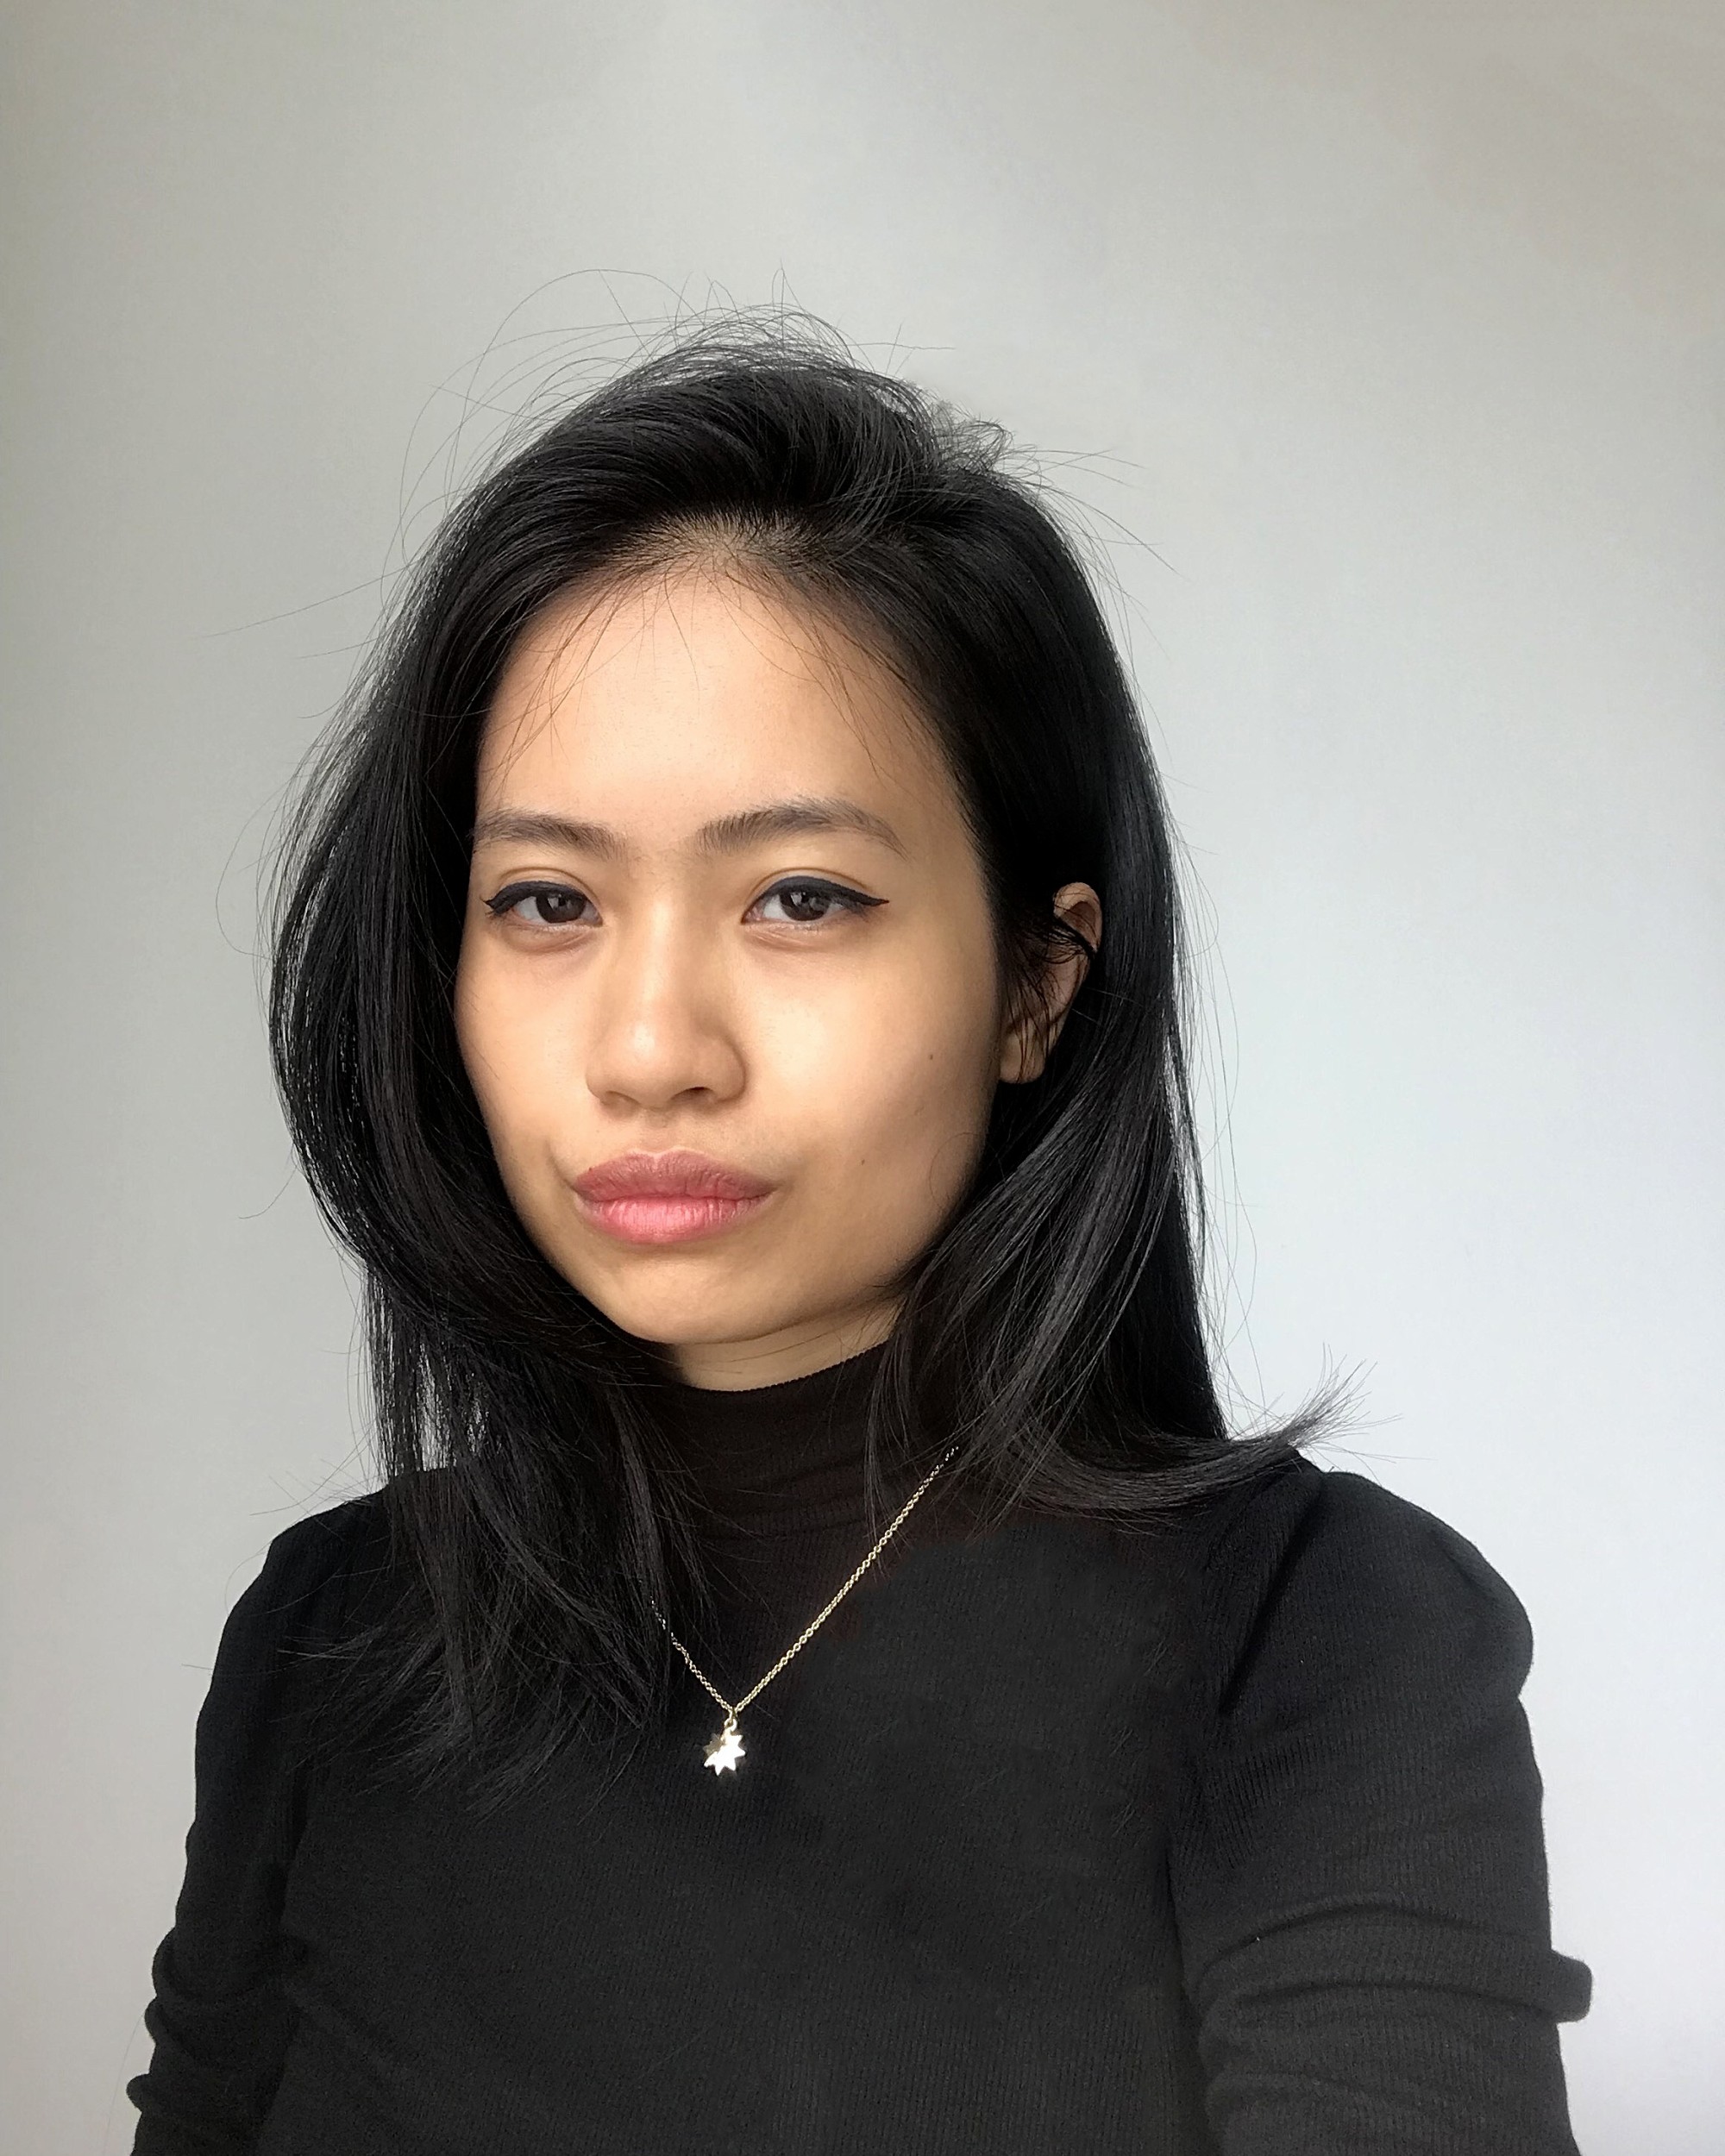 Quyên Nguyễn-Hoàng wears a black turtleneck in front of a white background, looking into the camera